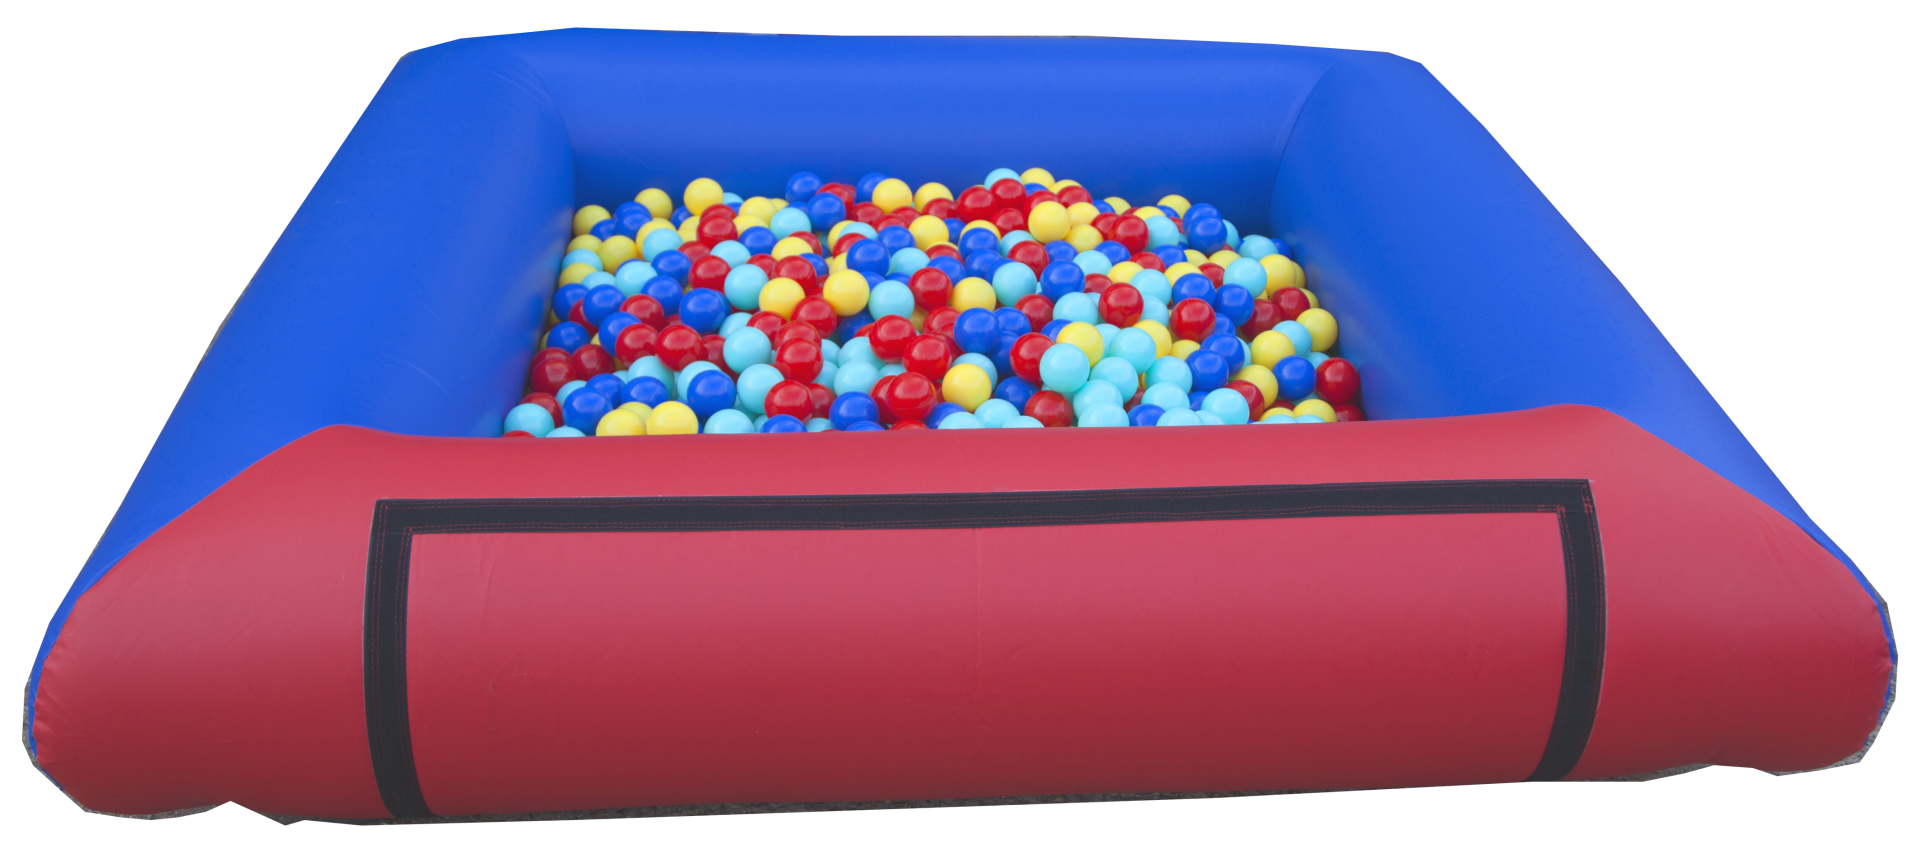 7ft square Red and Blue ballpool with a velcro panel for  attaching selected themed artwork. also available in pink and purple